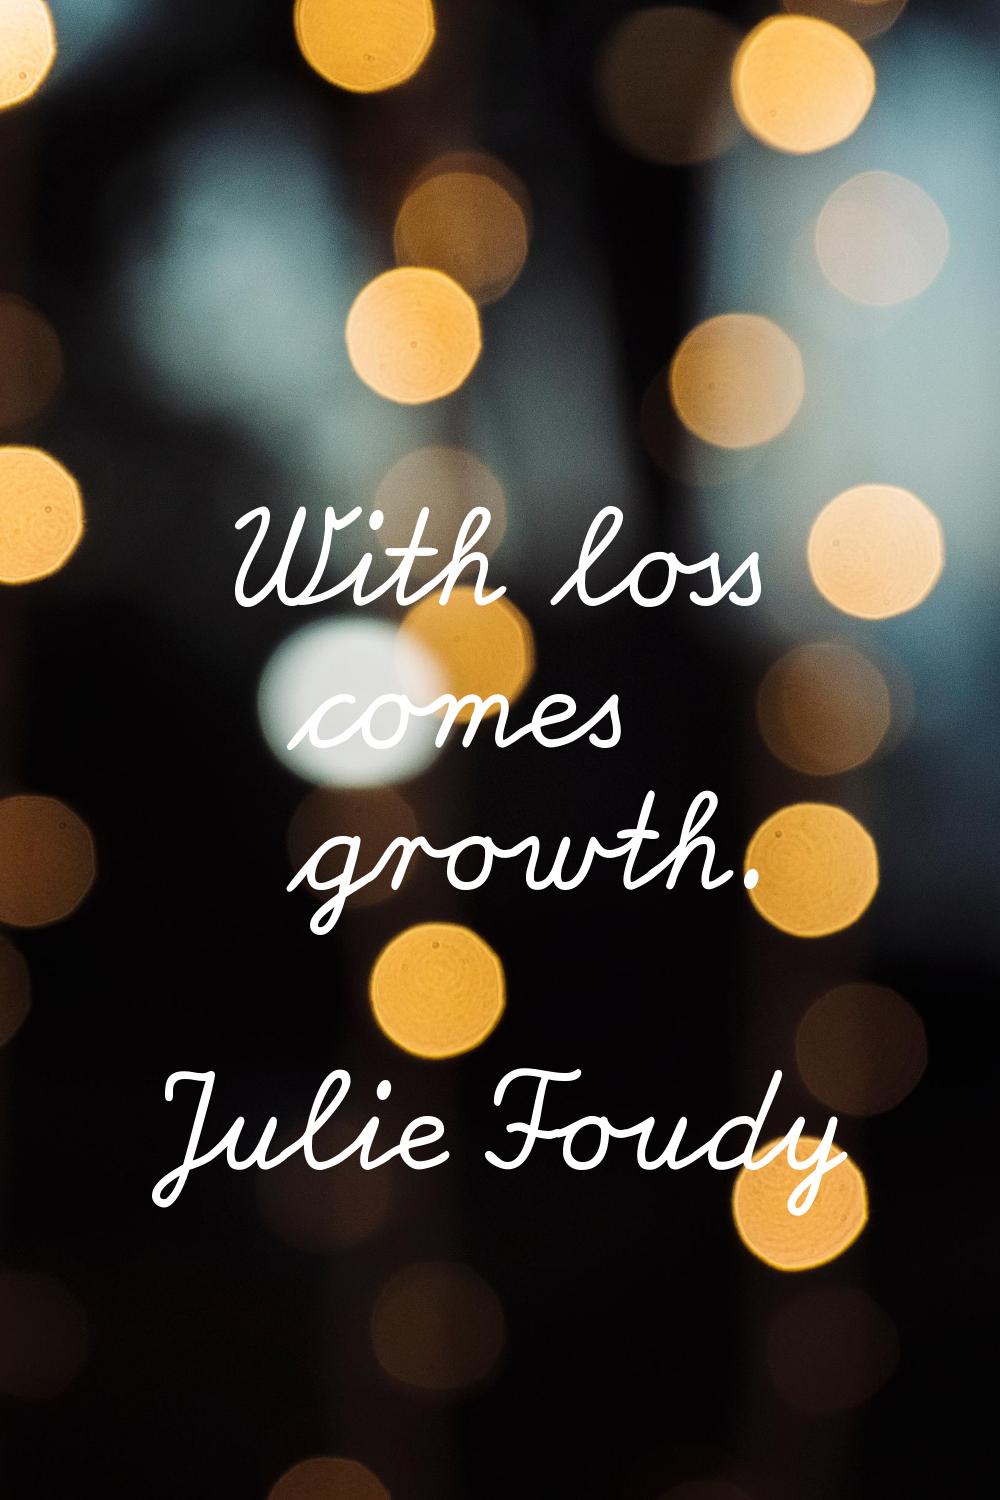 With loss comes growth.